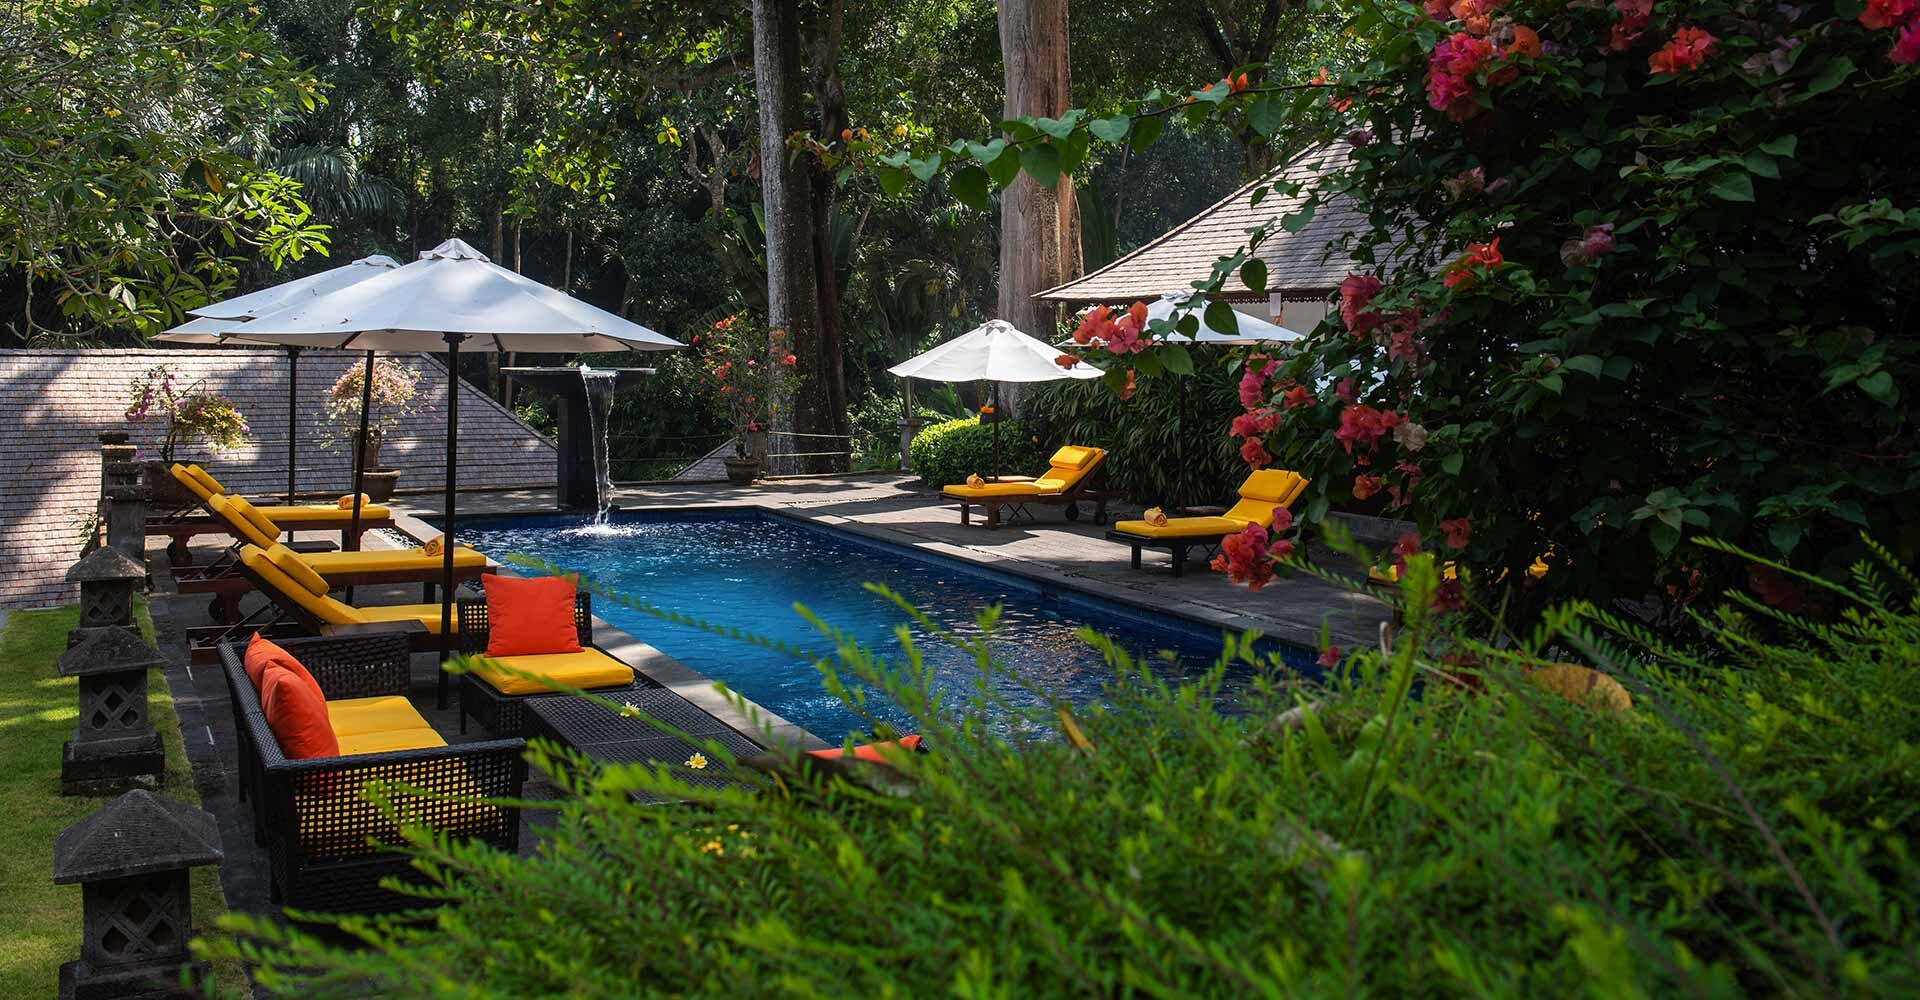 Luxury seating around the tranquil poolside area.